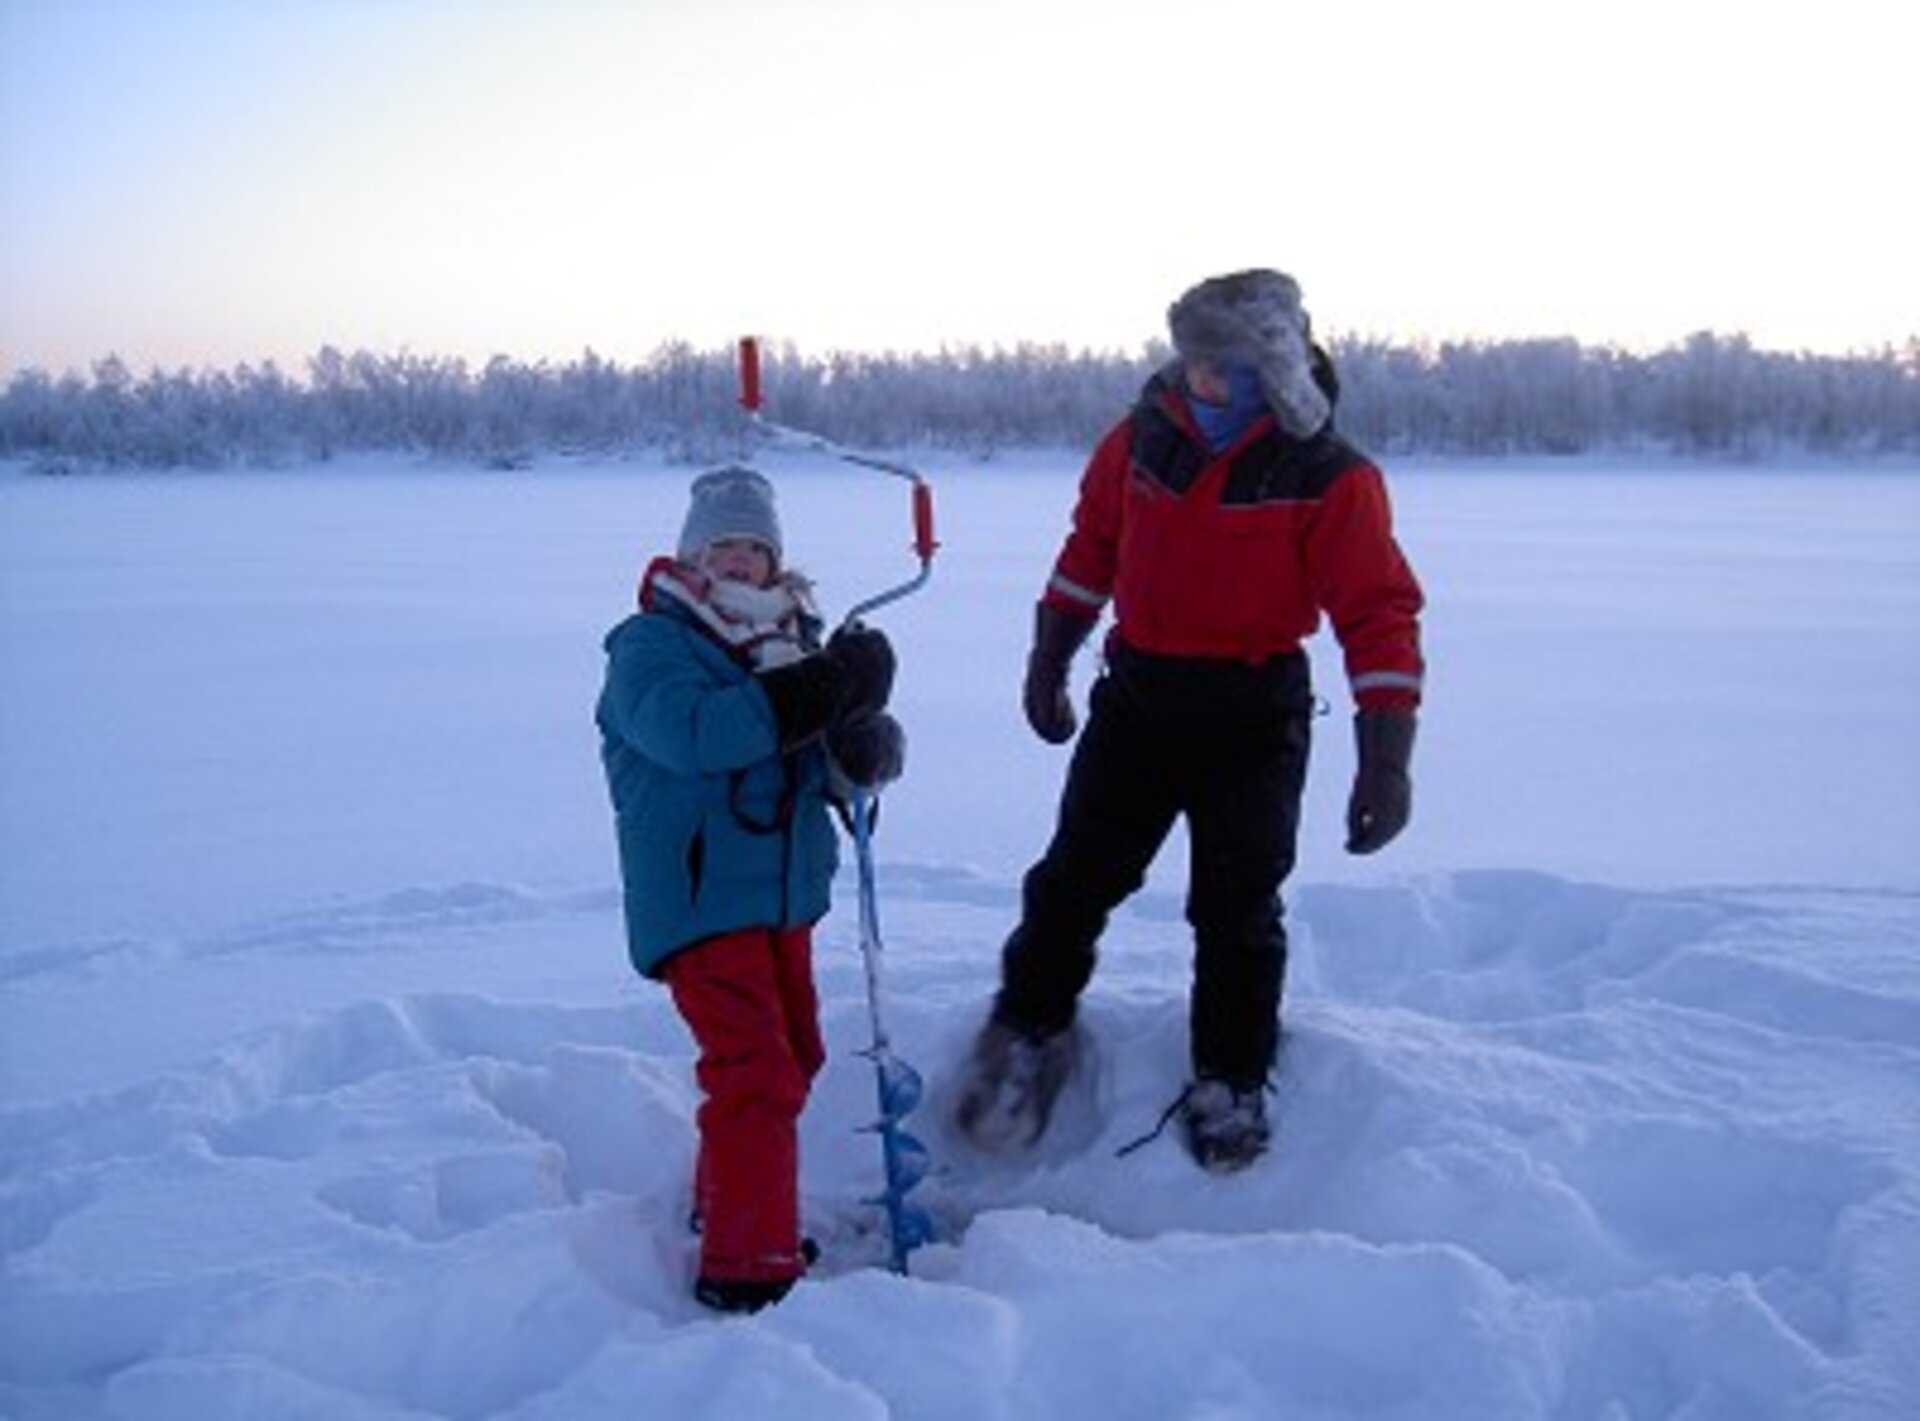 André Kuipers and his daughter drilling for water during his holiday in Sweden